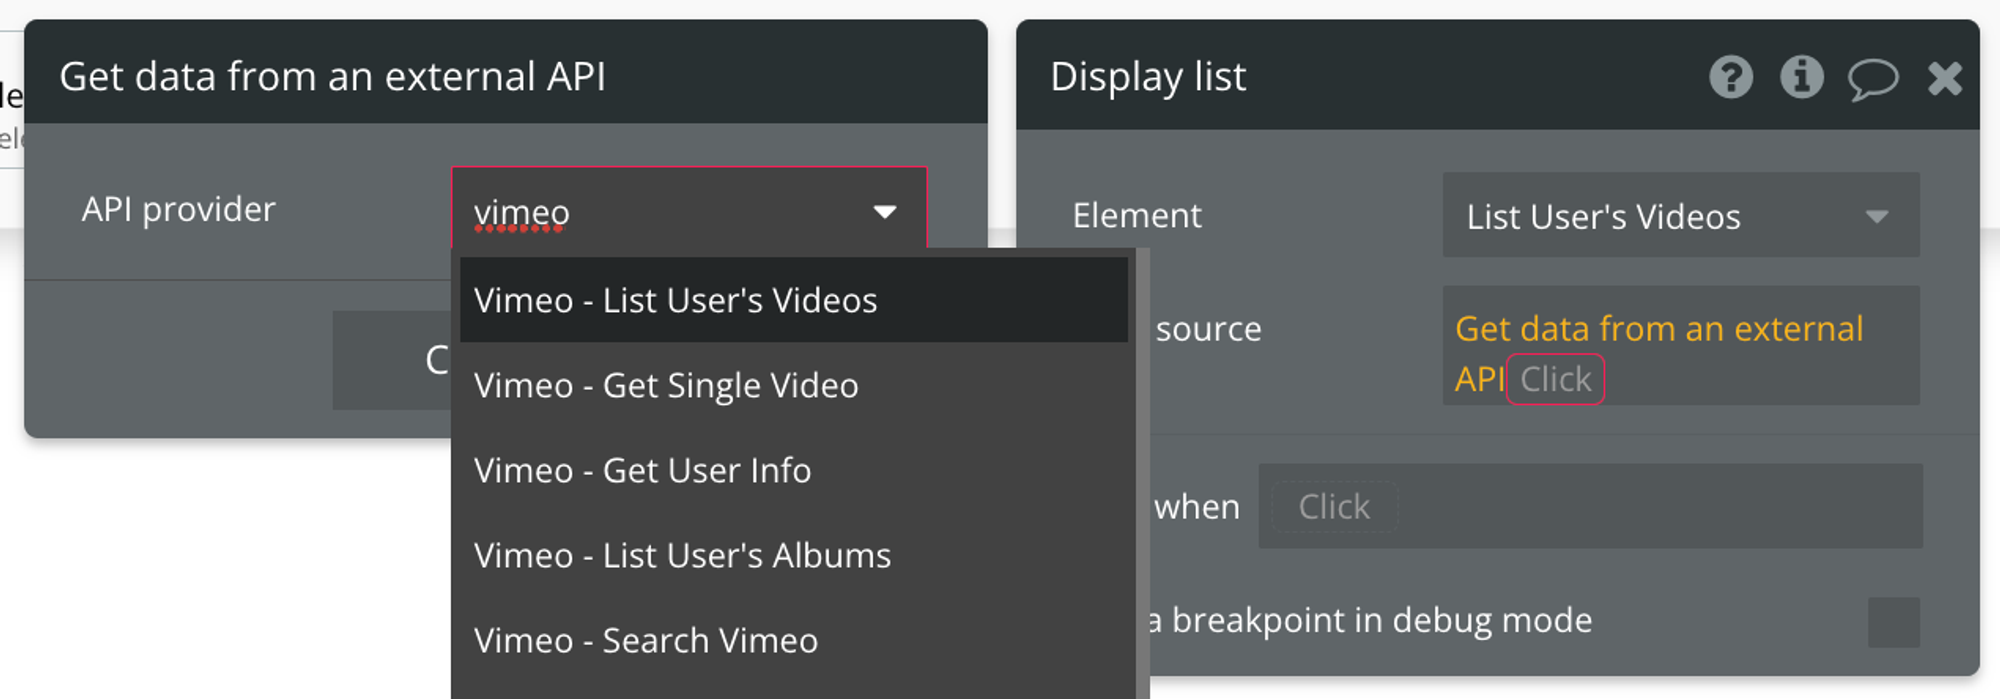 Select "Get data from external API" from the list of data sources, then find Vimeo - List User's Videos from the list of API providers